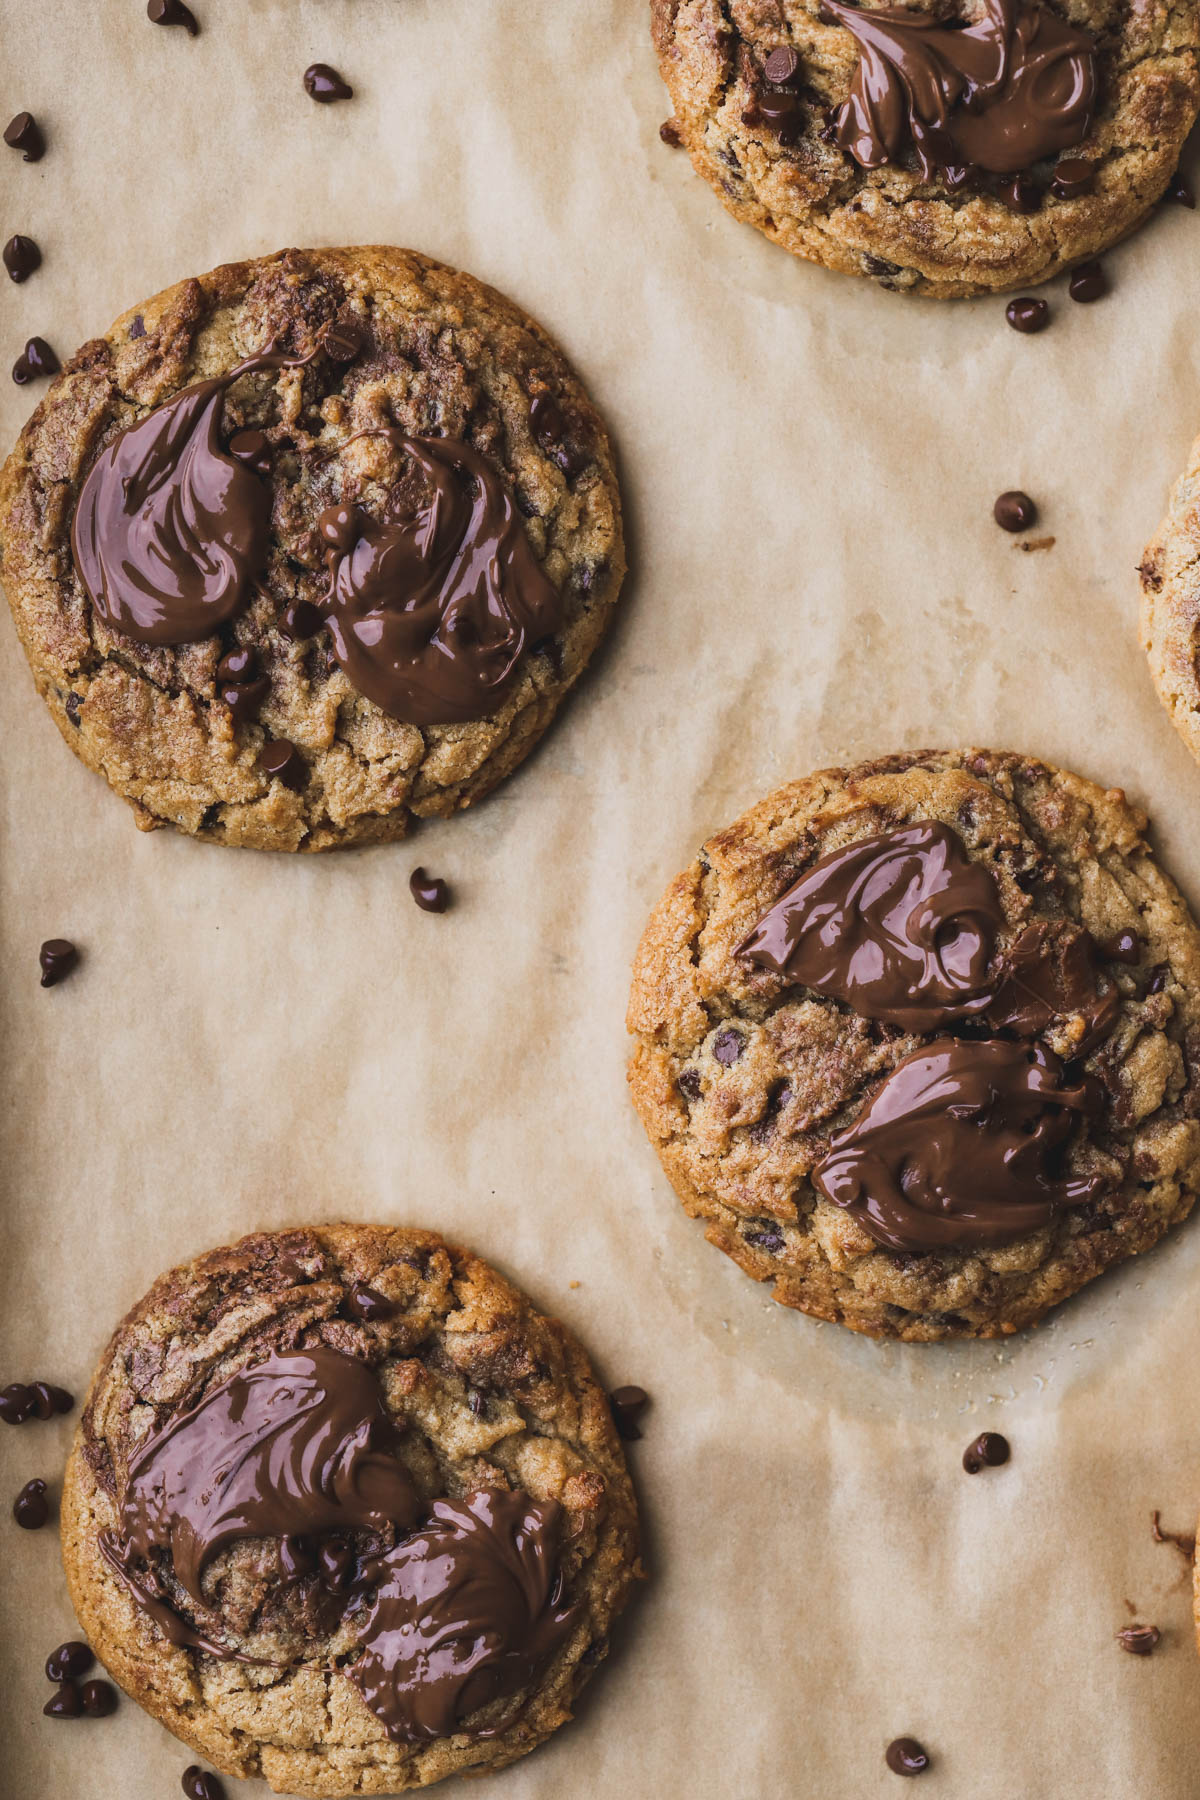 Baked peanut butter Nutella cookies with dollops of melted Nutella on top.  